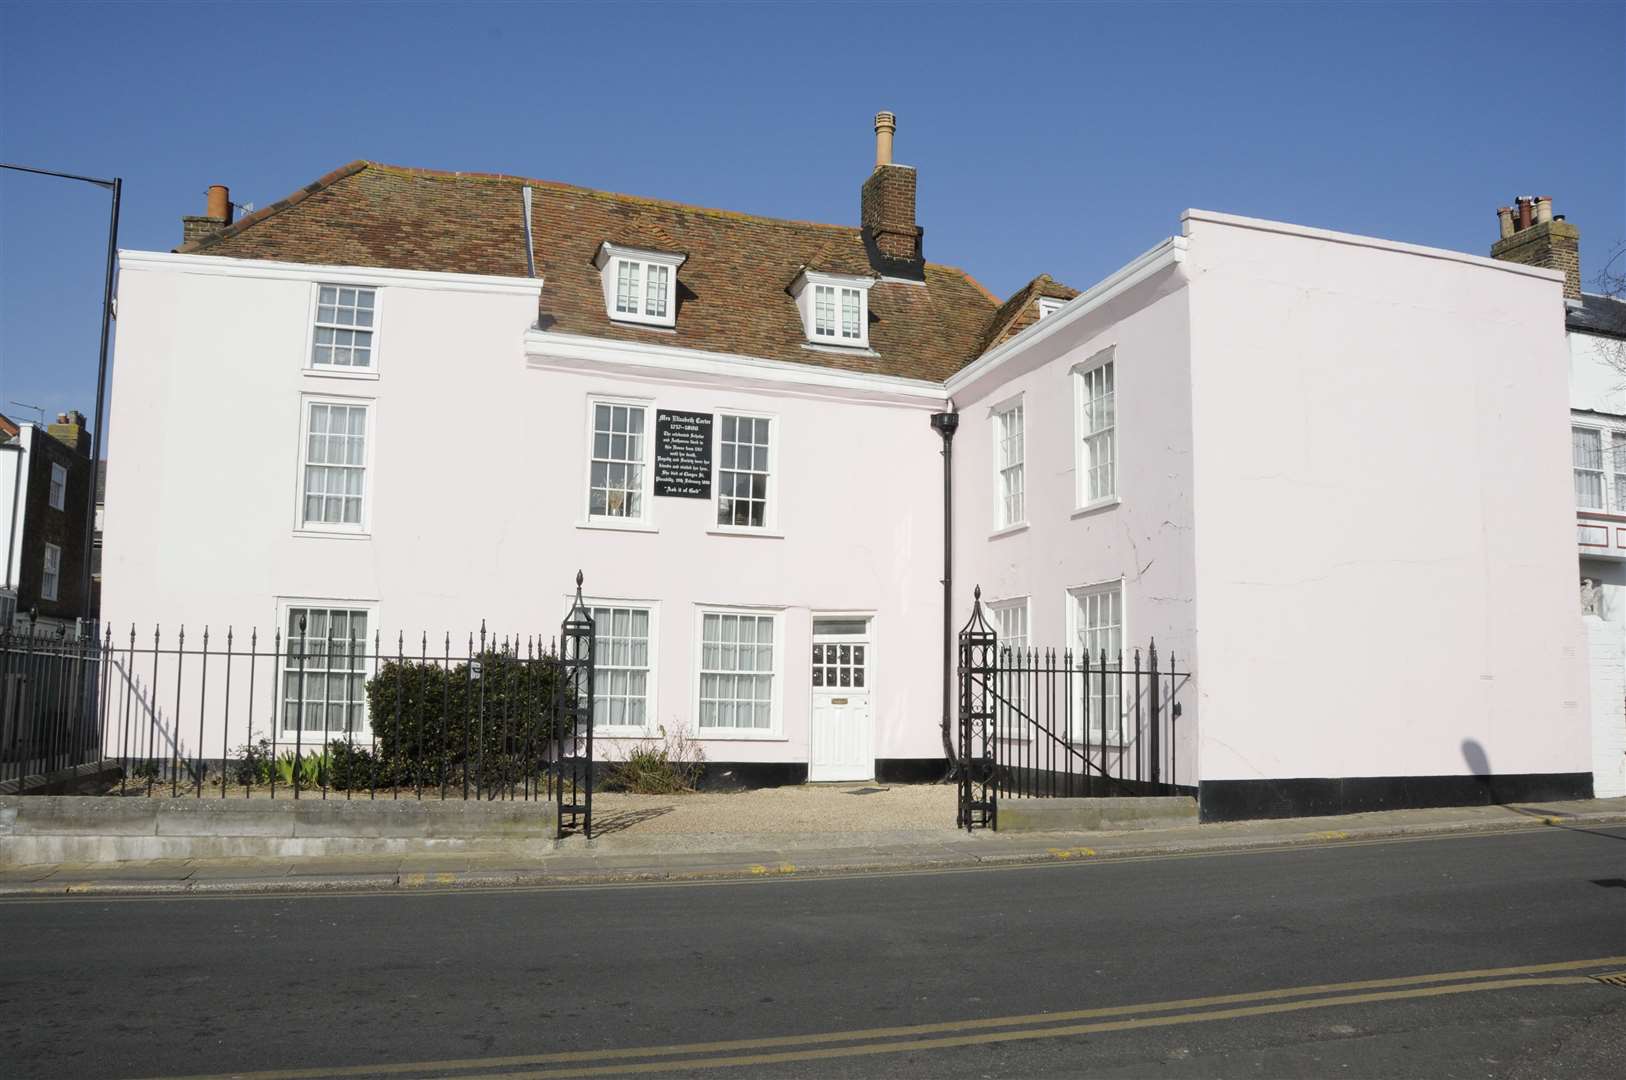 Elizabeth Carter's house in South Street, Deal. Picture: Paul Amos